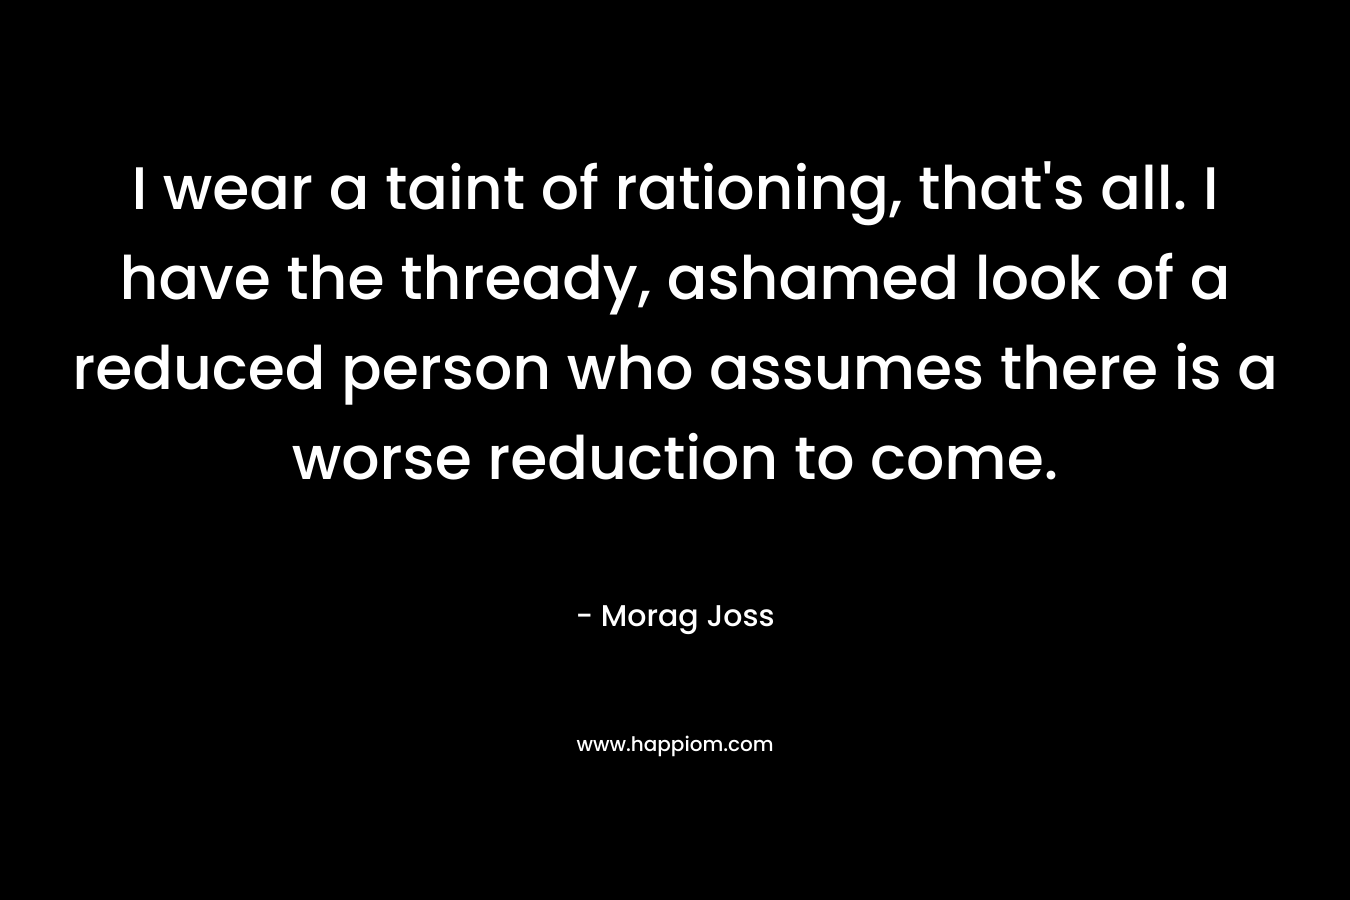 I wear a taint of rationing, that's all. I have the thready, ashamed look of a reduced person who assumes there is a worse reduction to come.